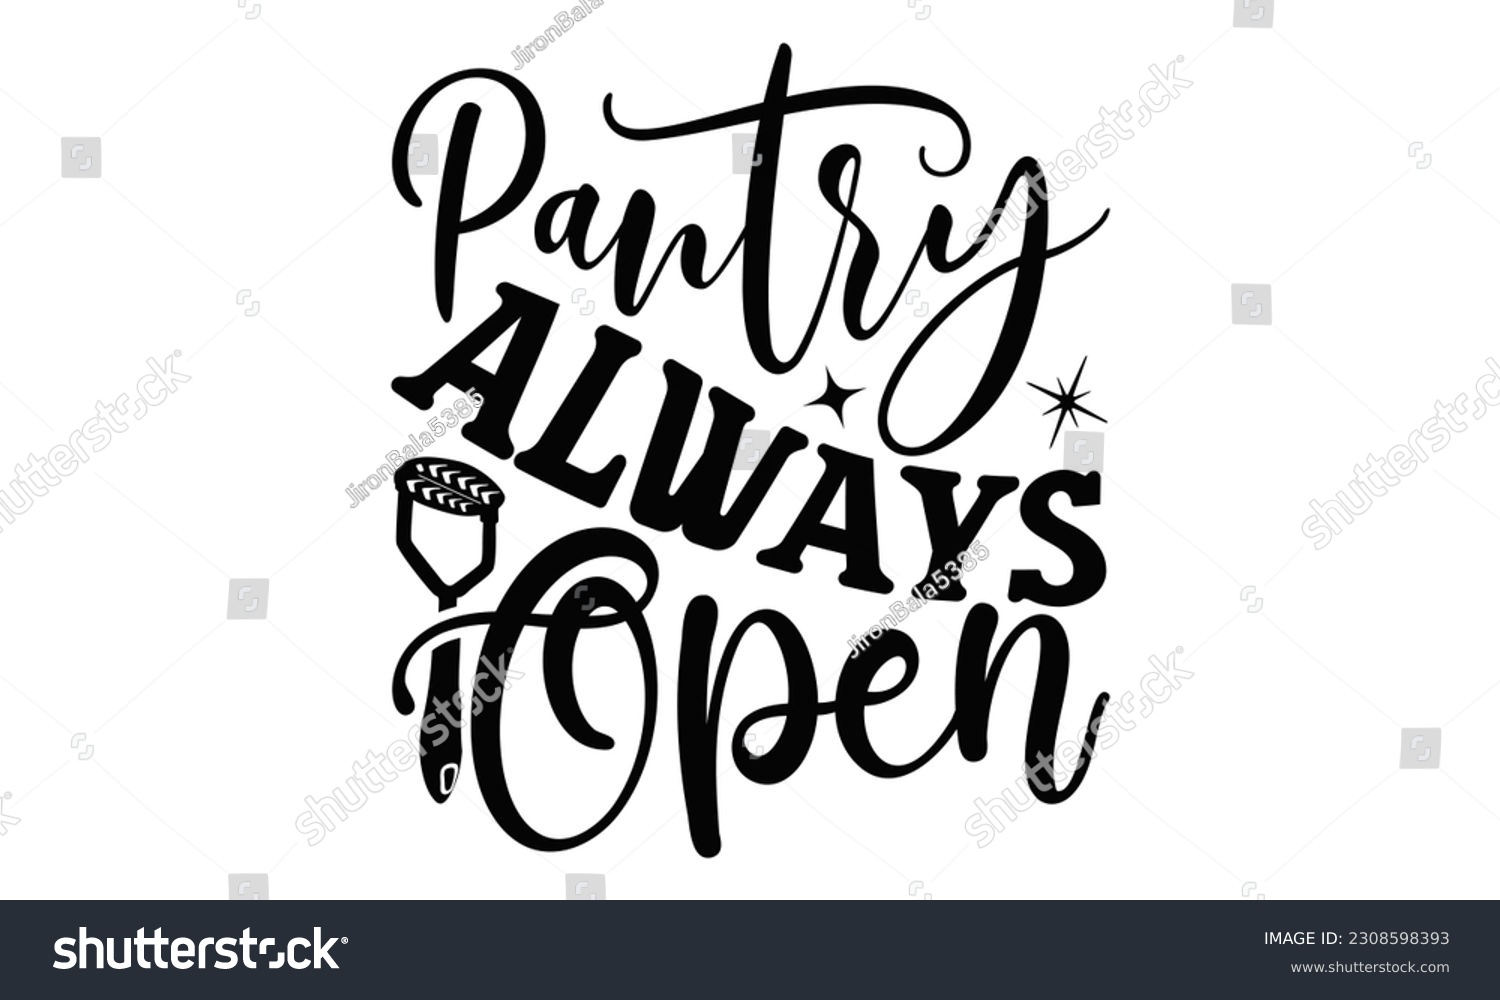 SVG of Pantry Always Open - Cooking SVG Design, Hand drawn vintage hand lettering, EPS, Files for Cutting, Illustration for prints on t-shirts, bags, posters, cards and Mug. svg